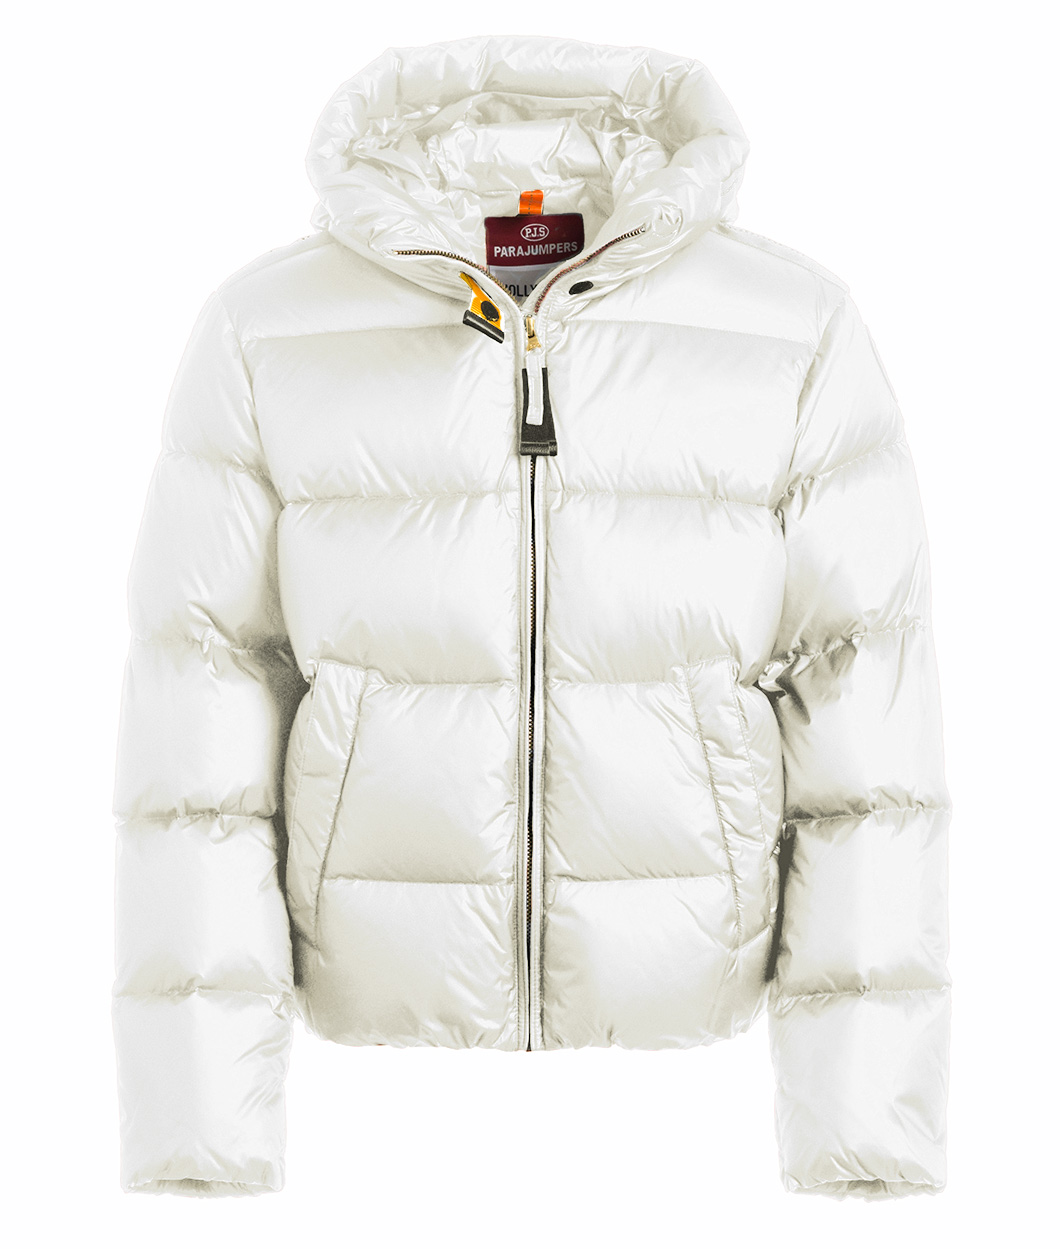 Parajumpers Daunenjacke Tilly - offwhite